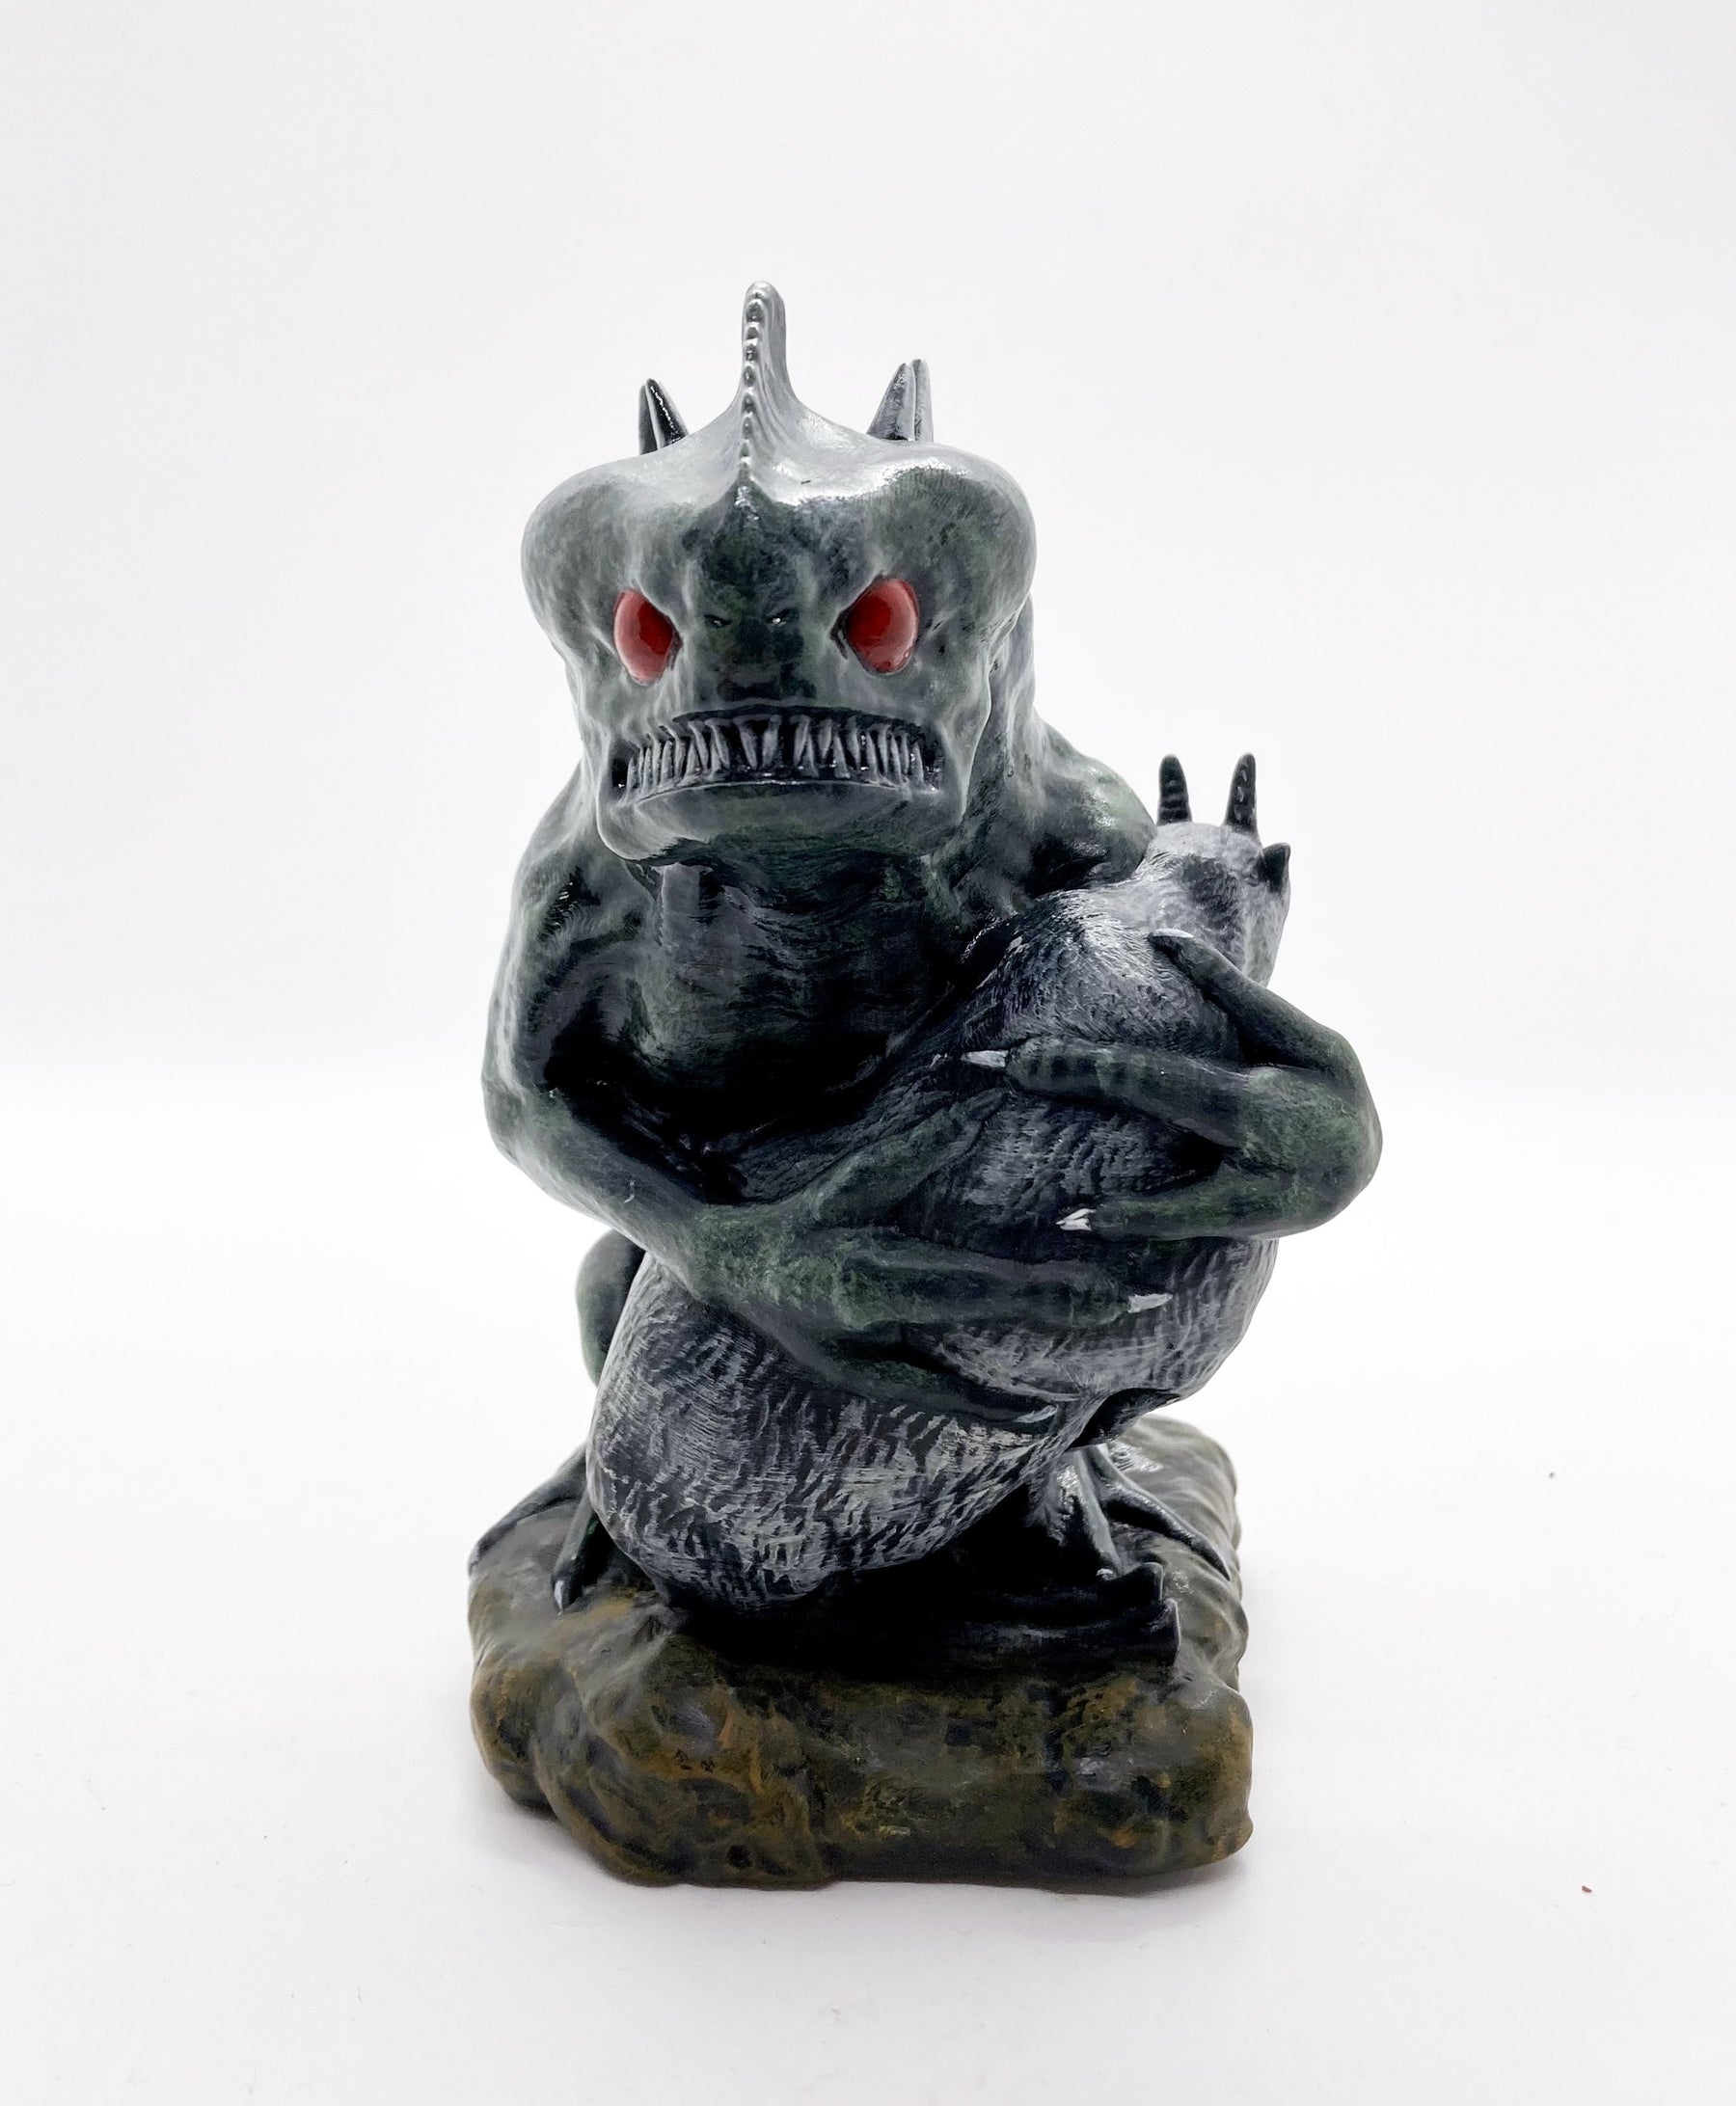 Cryptozoo-Fubi El Chupacabra Midnight Goat Snack Edition vinyl figure by Weston Brownlee Available Now